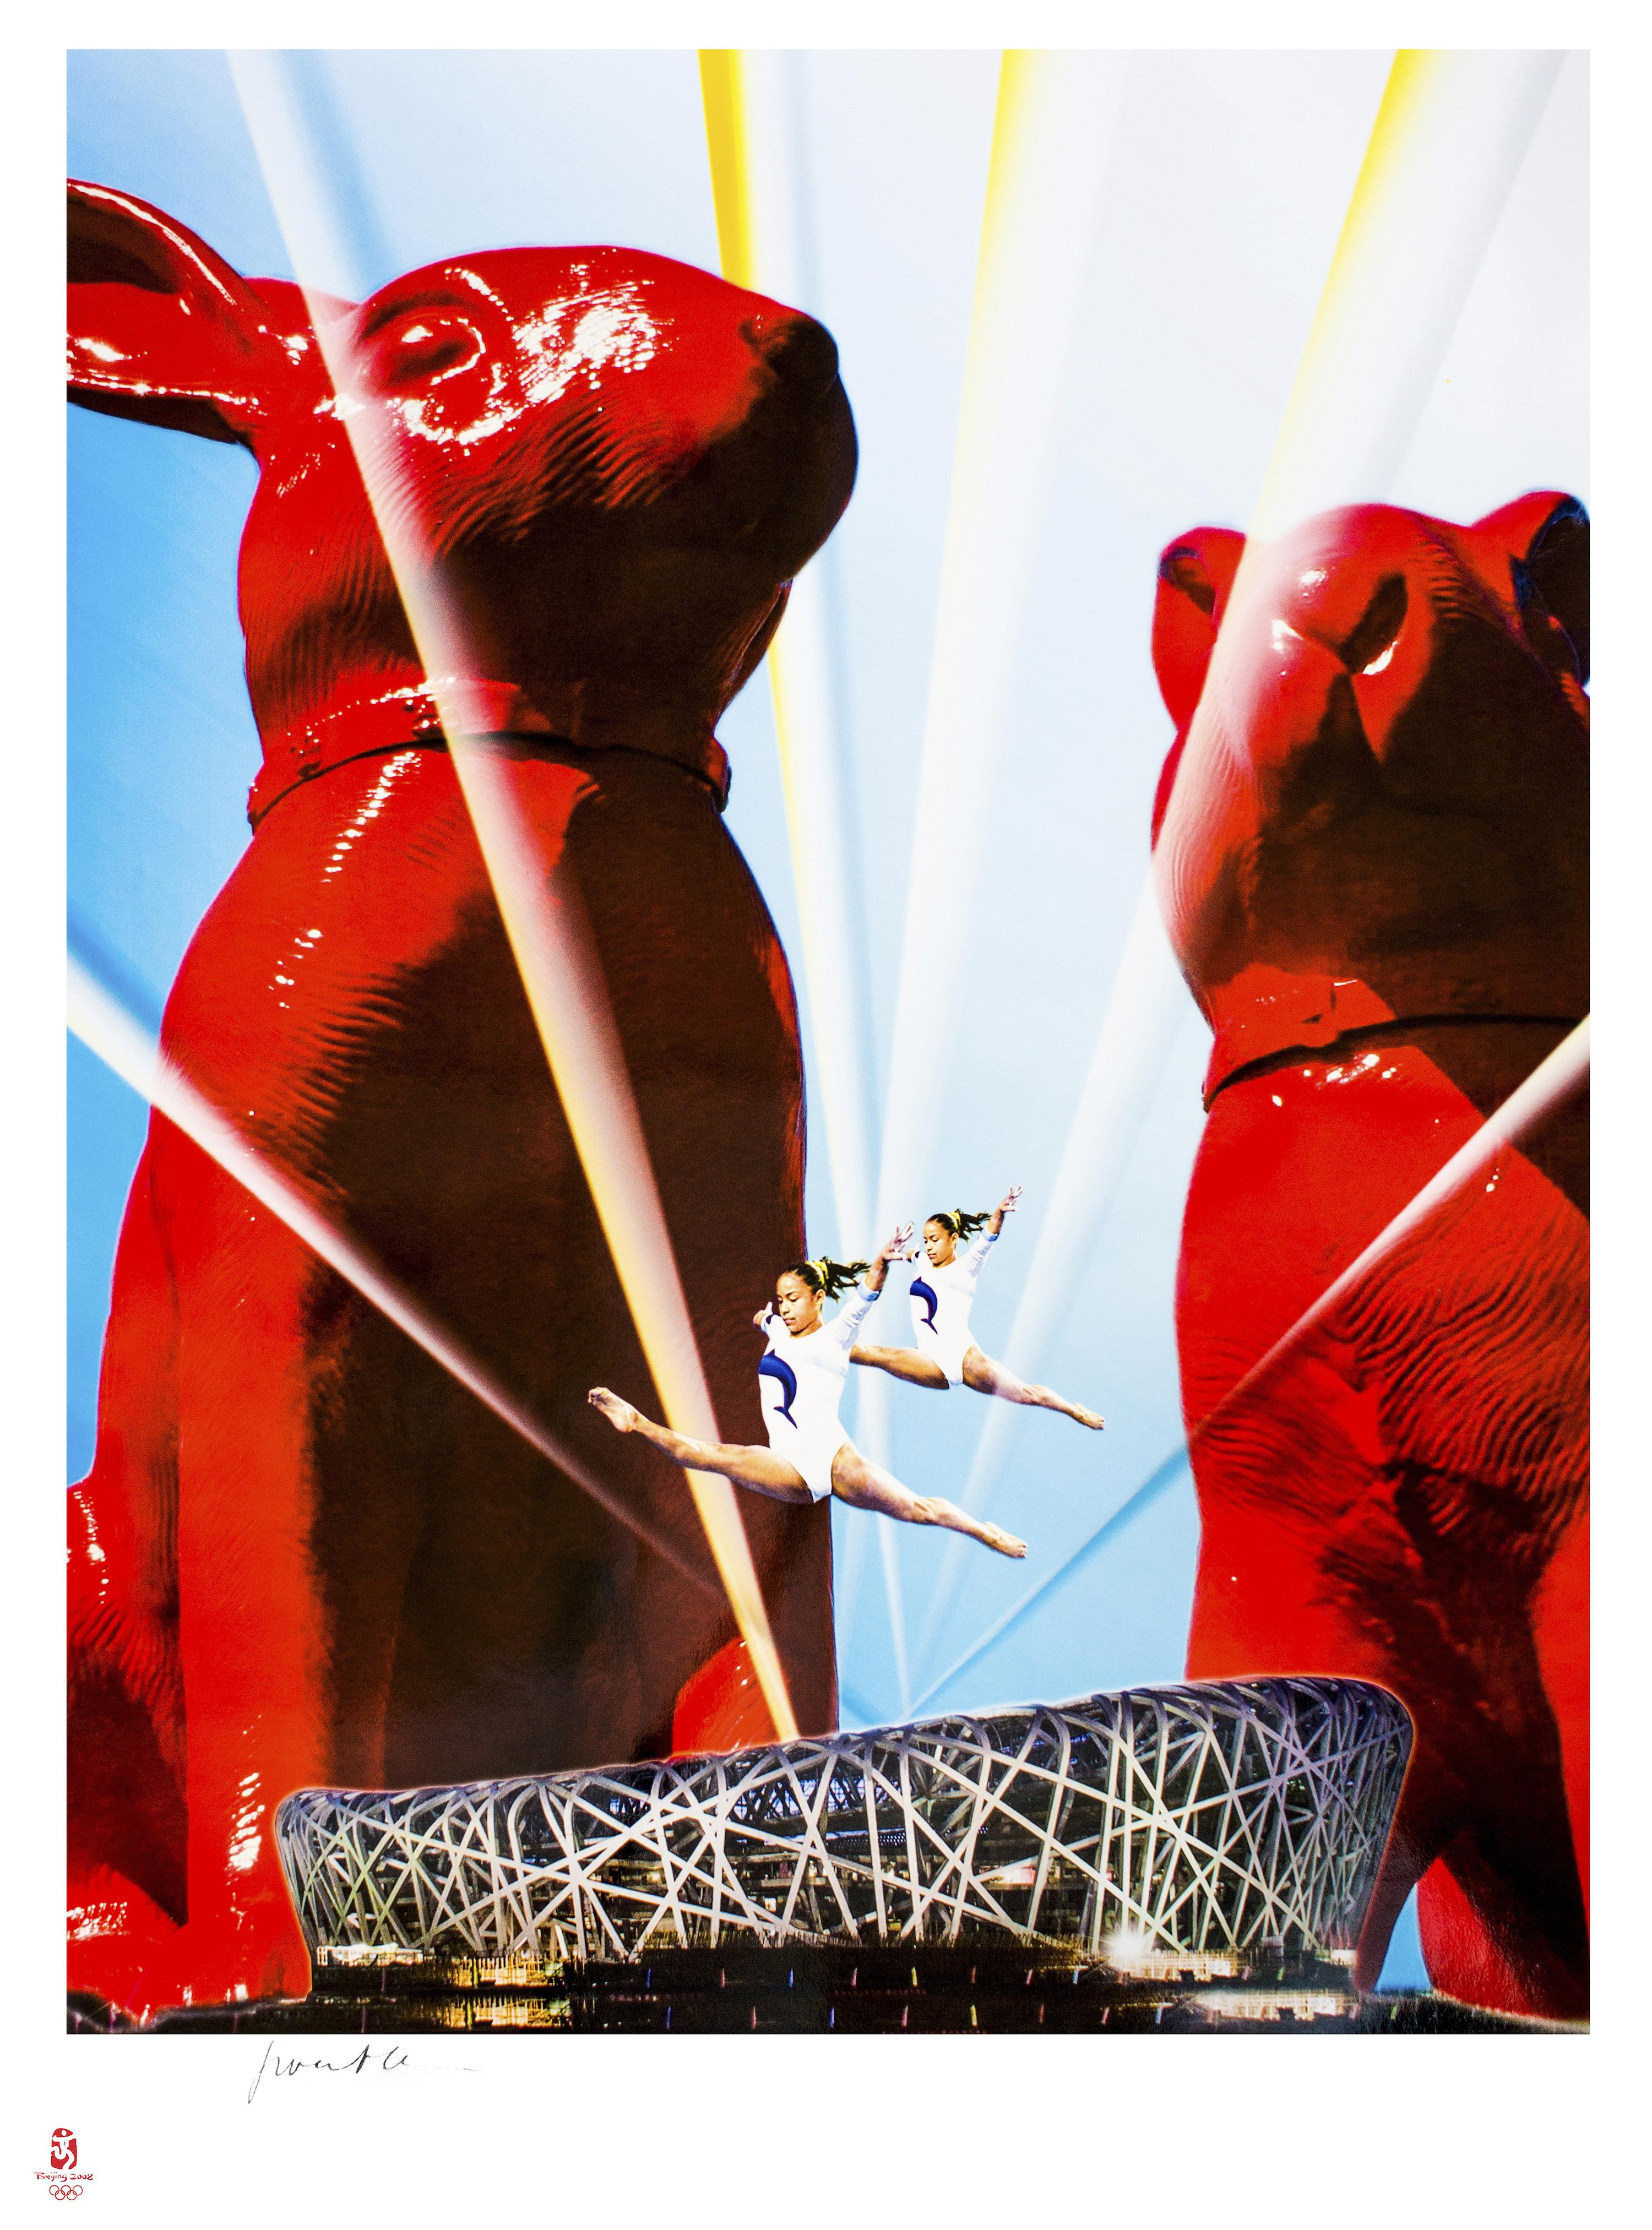 William Sweetlove Animal Print - Olympic Stars Between Cloned Rabbits - Original Lithograph by W. Sweetlove -2008